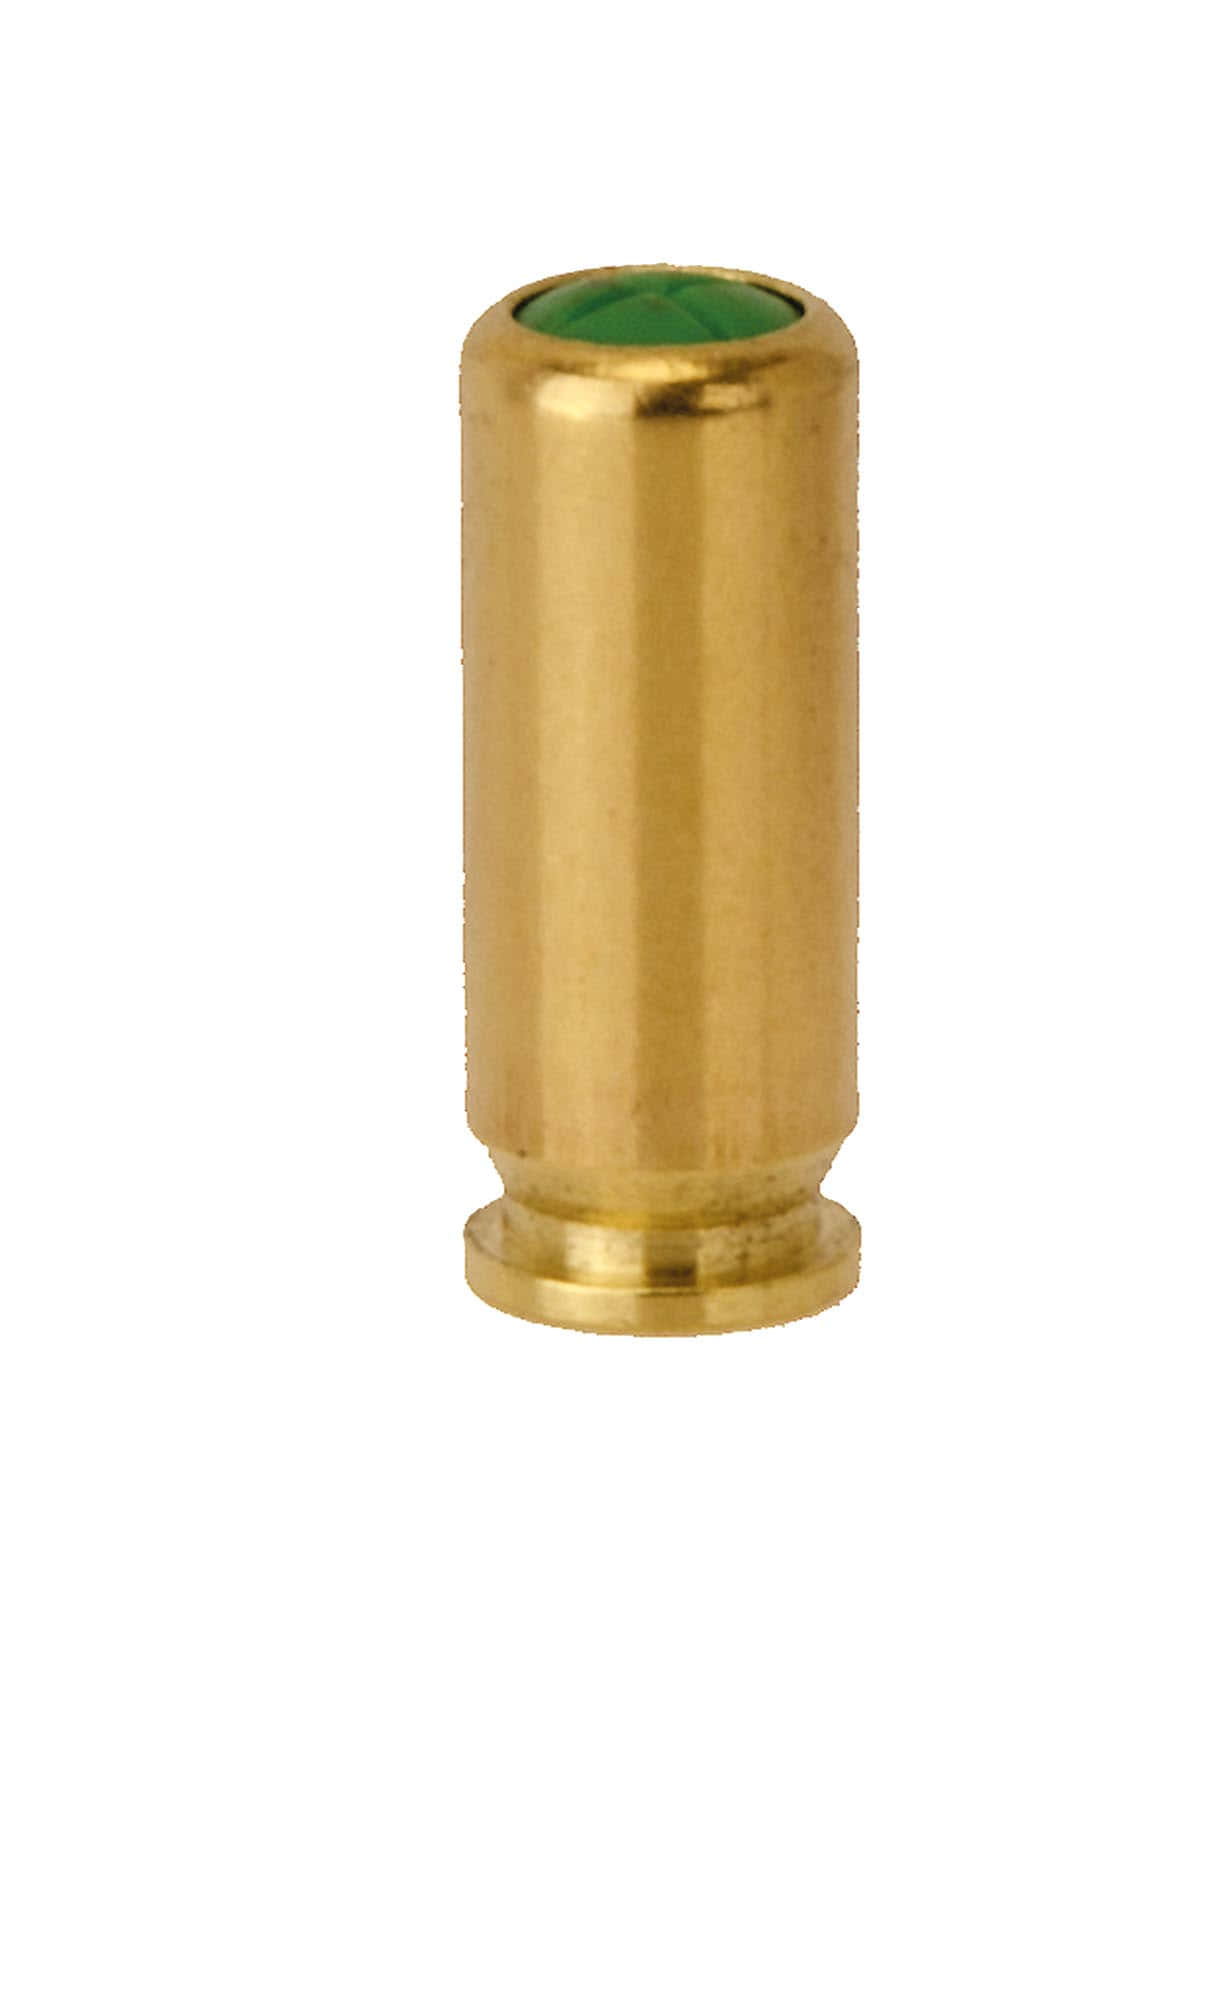 MUNITION A BLANC KAISER x 50 - 9MM - PA - Wicked Store